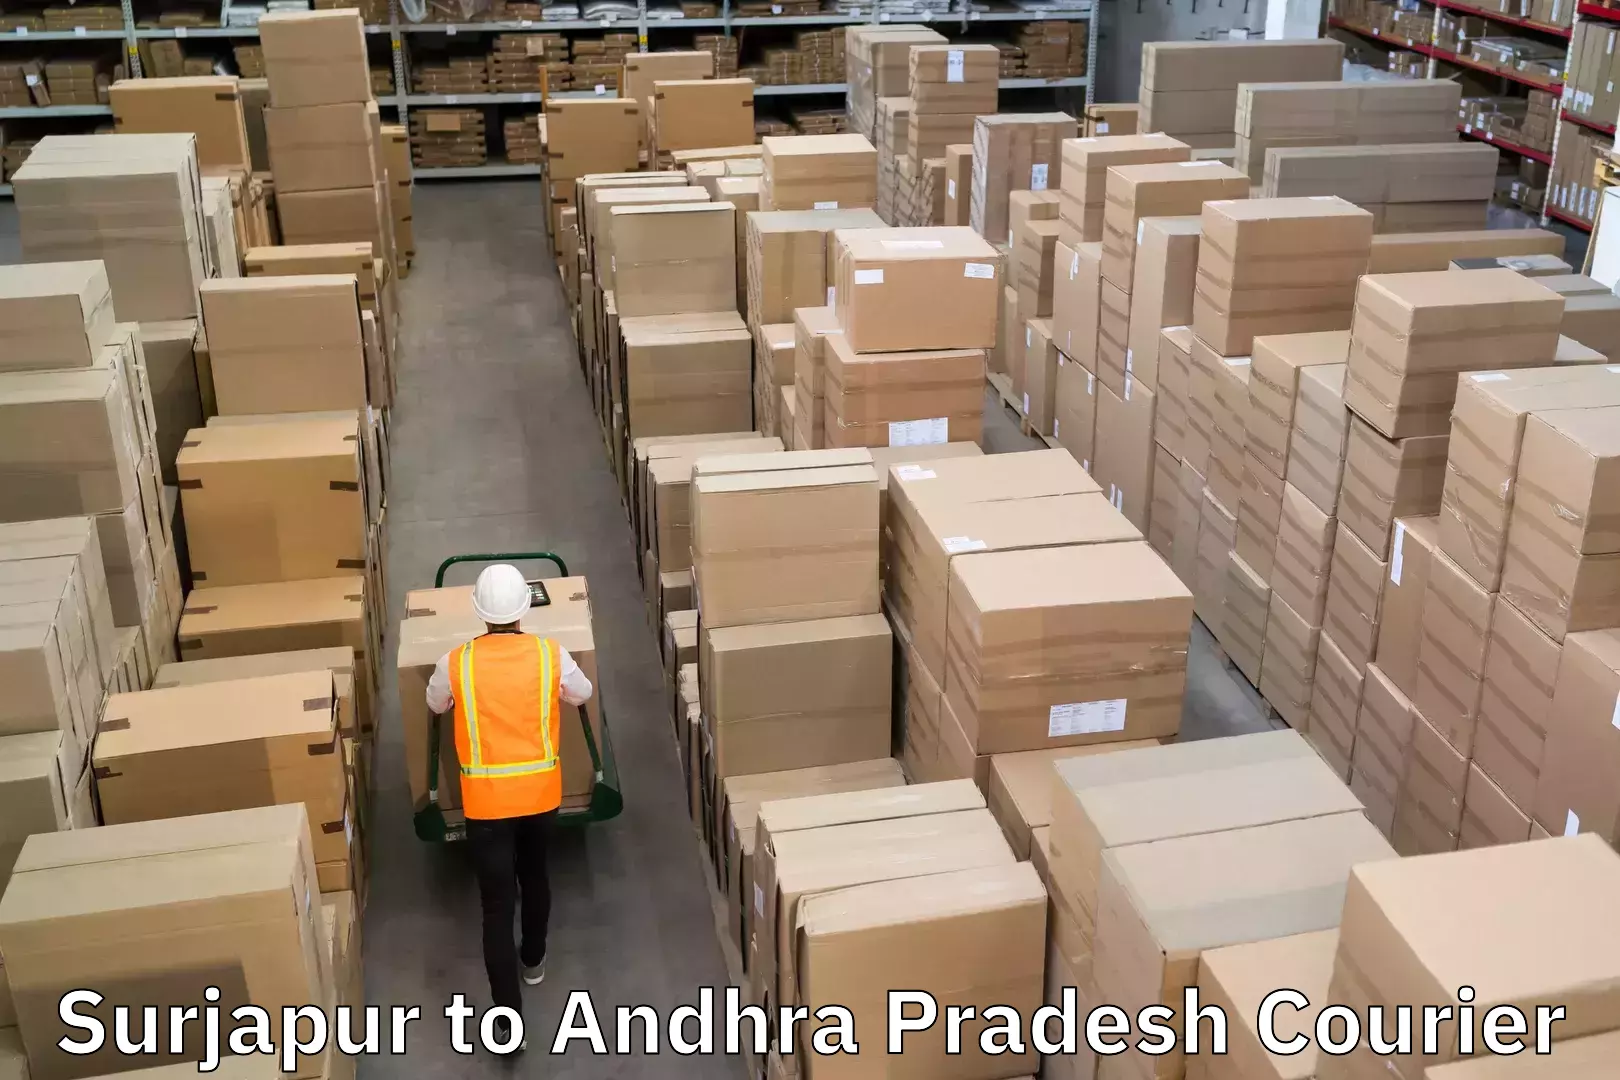 Parcel delivery automation in Surjapur to Andhra Pradesh